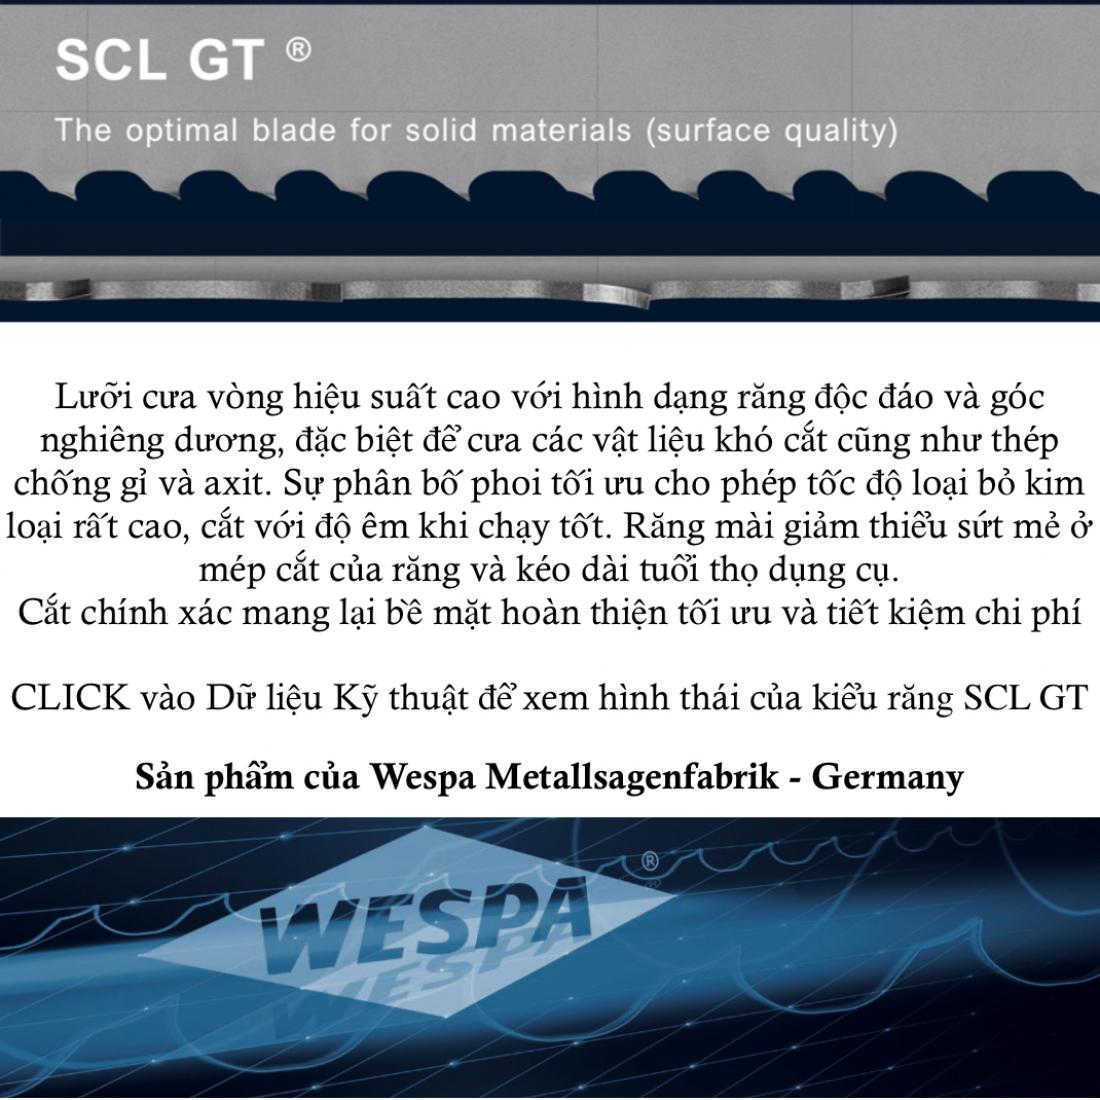 SCL GT